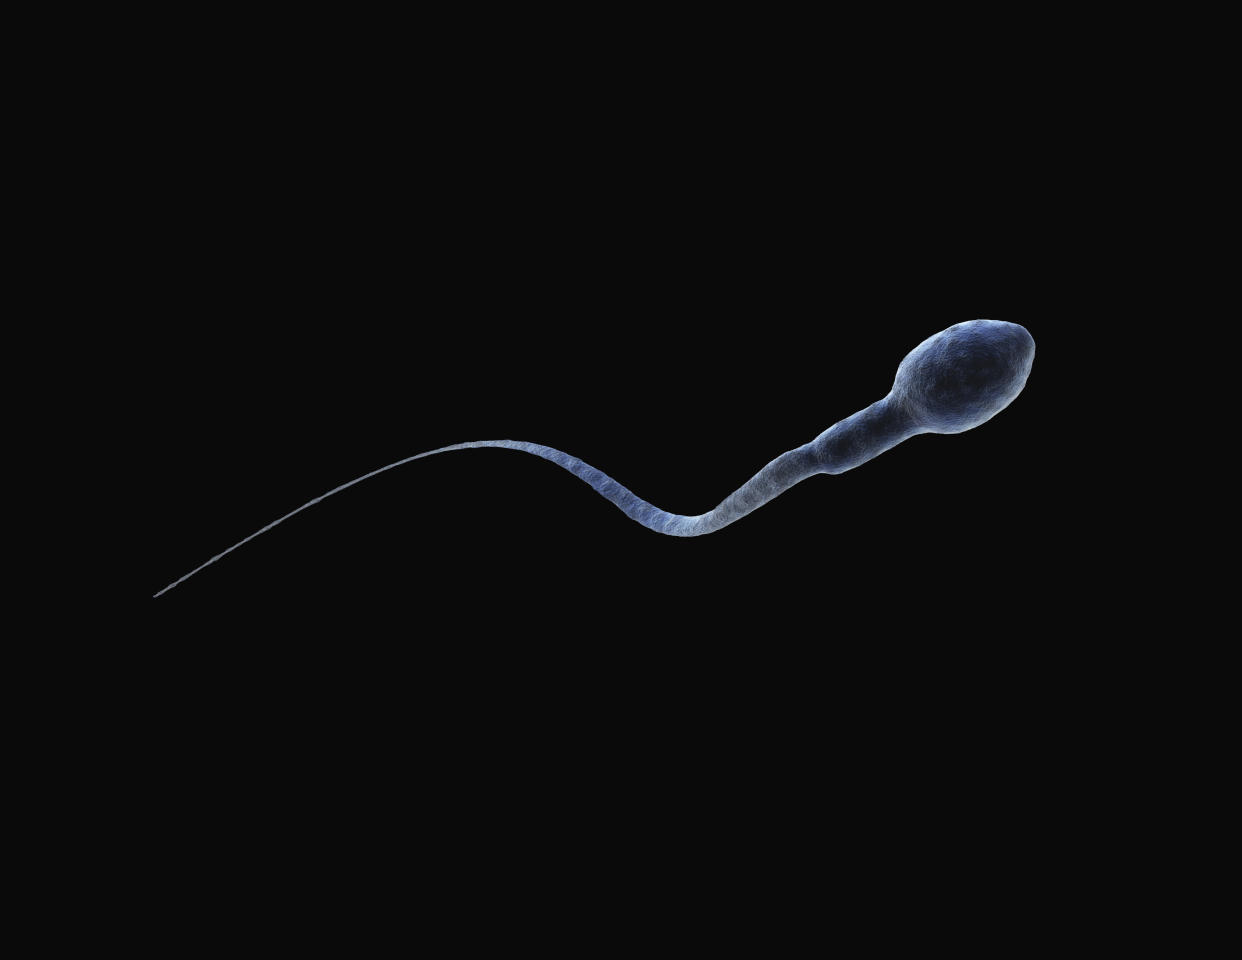 An image of a spermatozoon.